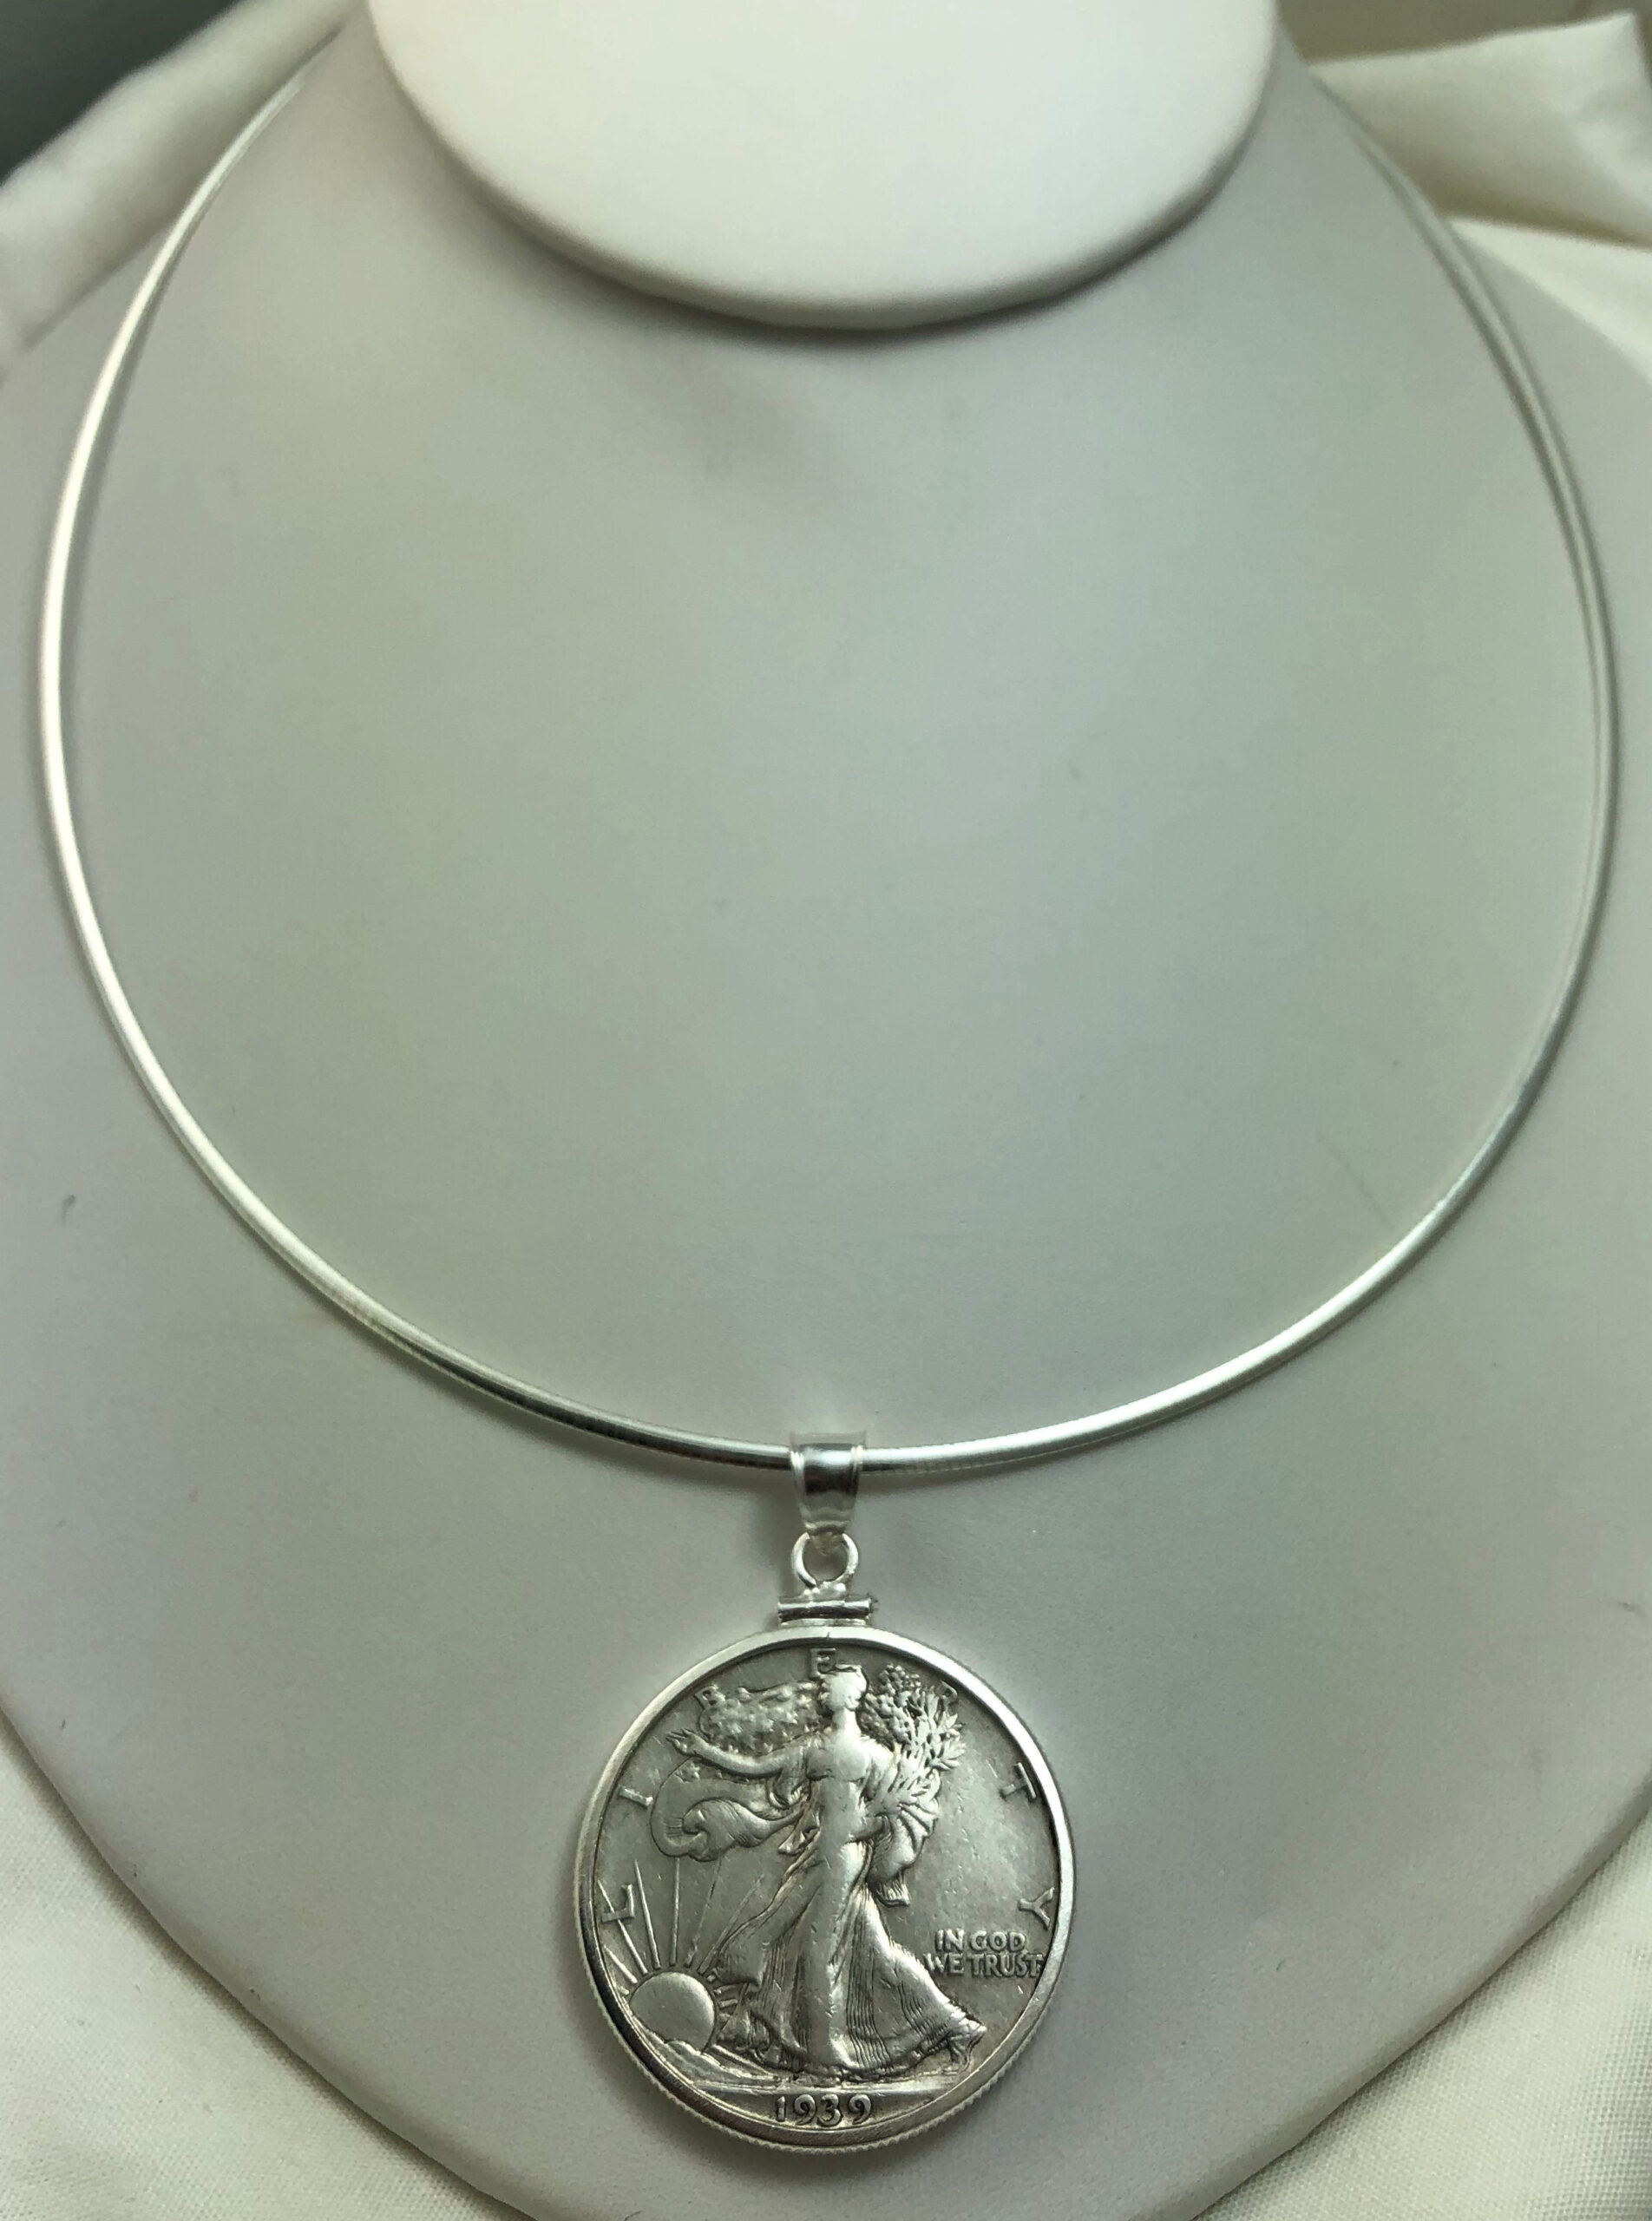 STATUE of LIBERTY HALF DOLLAR Necklace - 1986 us coin pendant jewelry 24